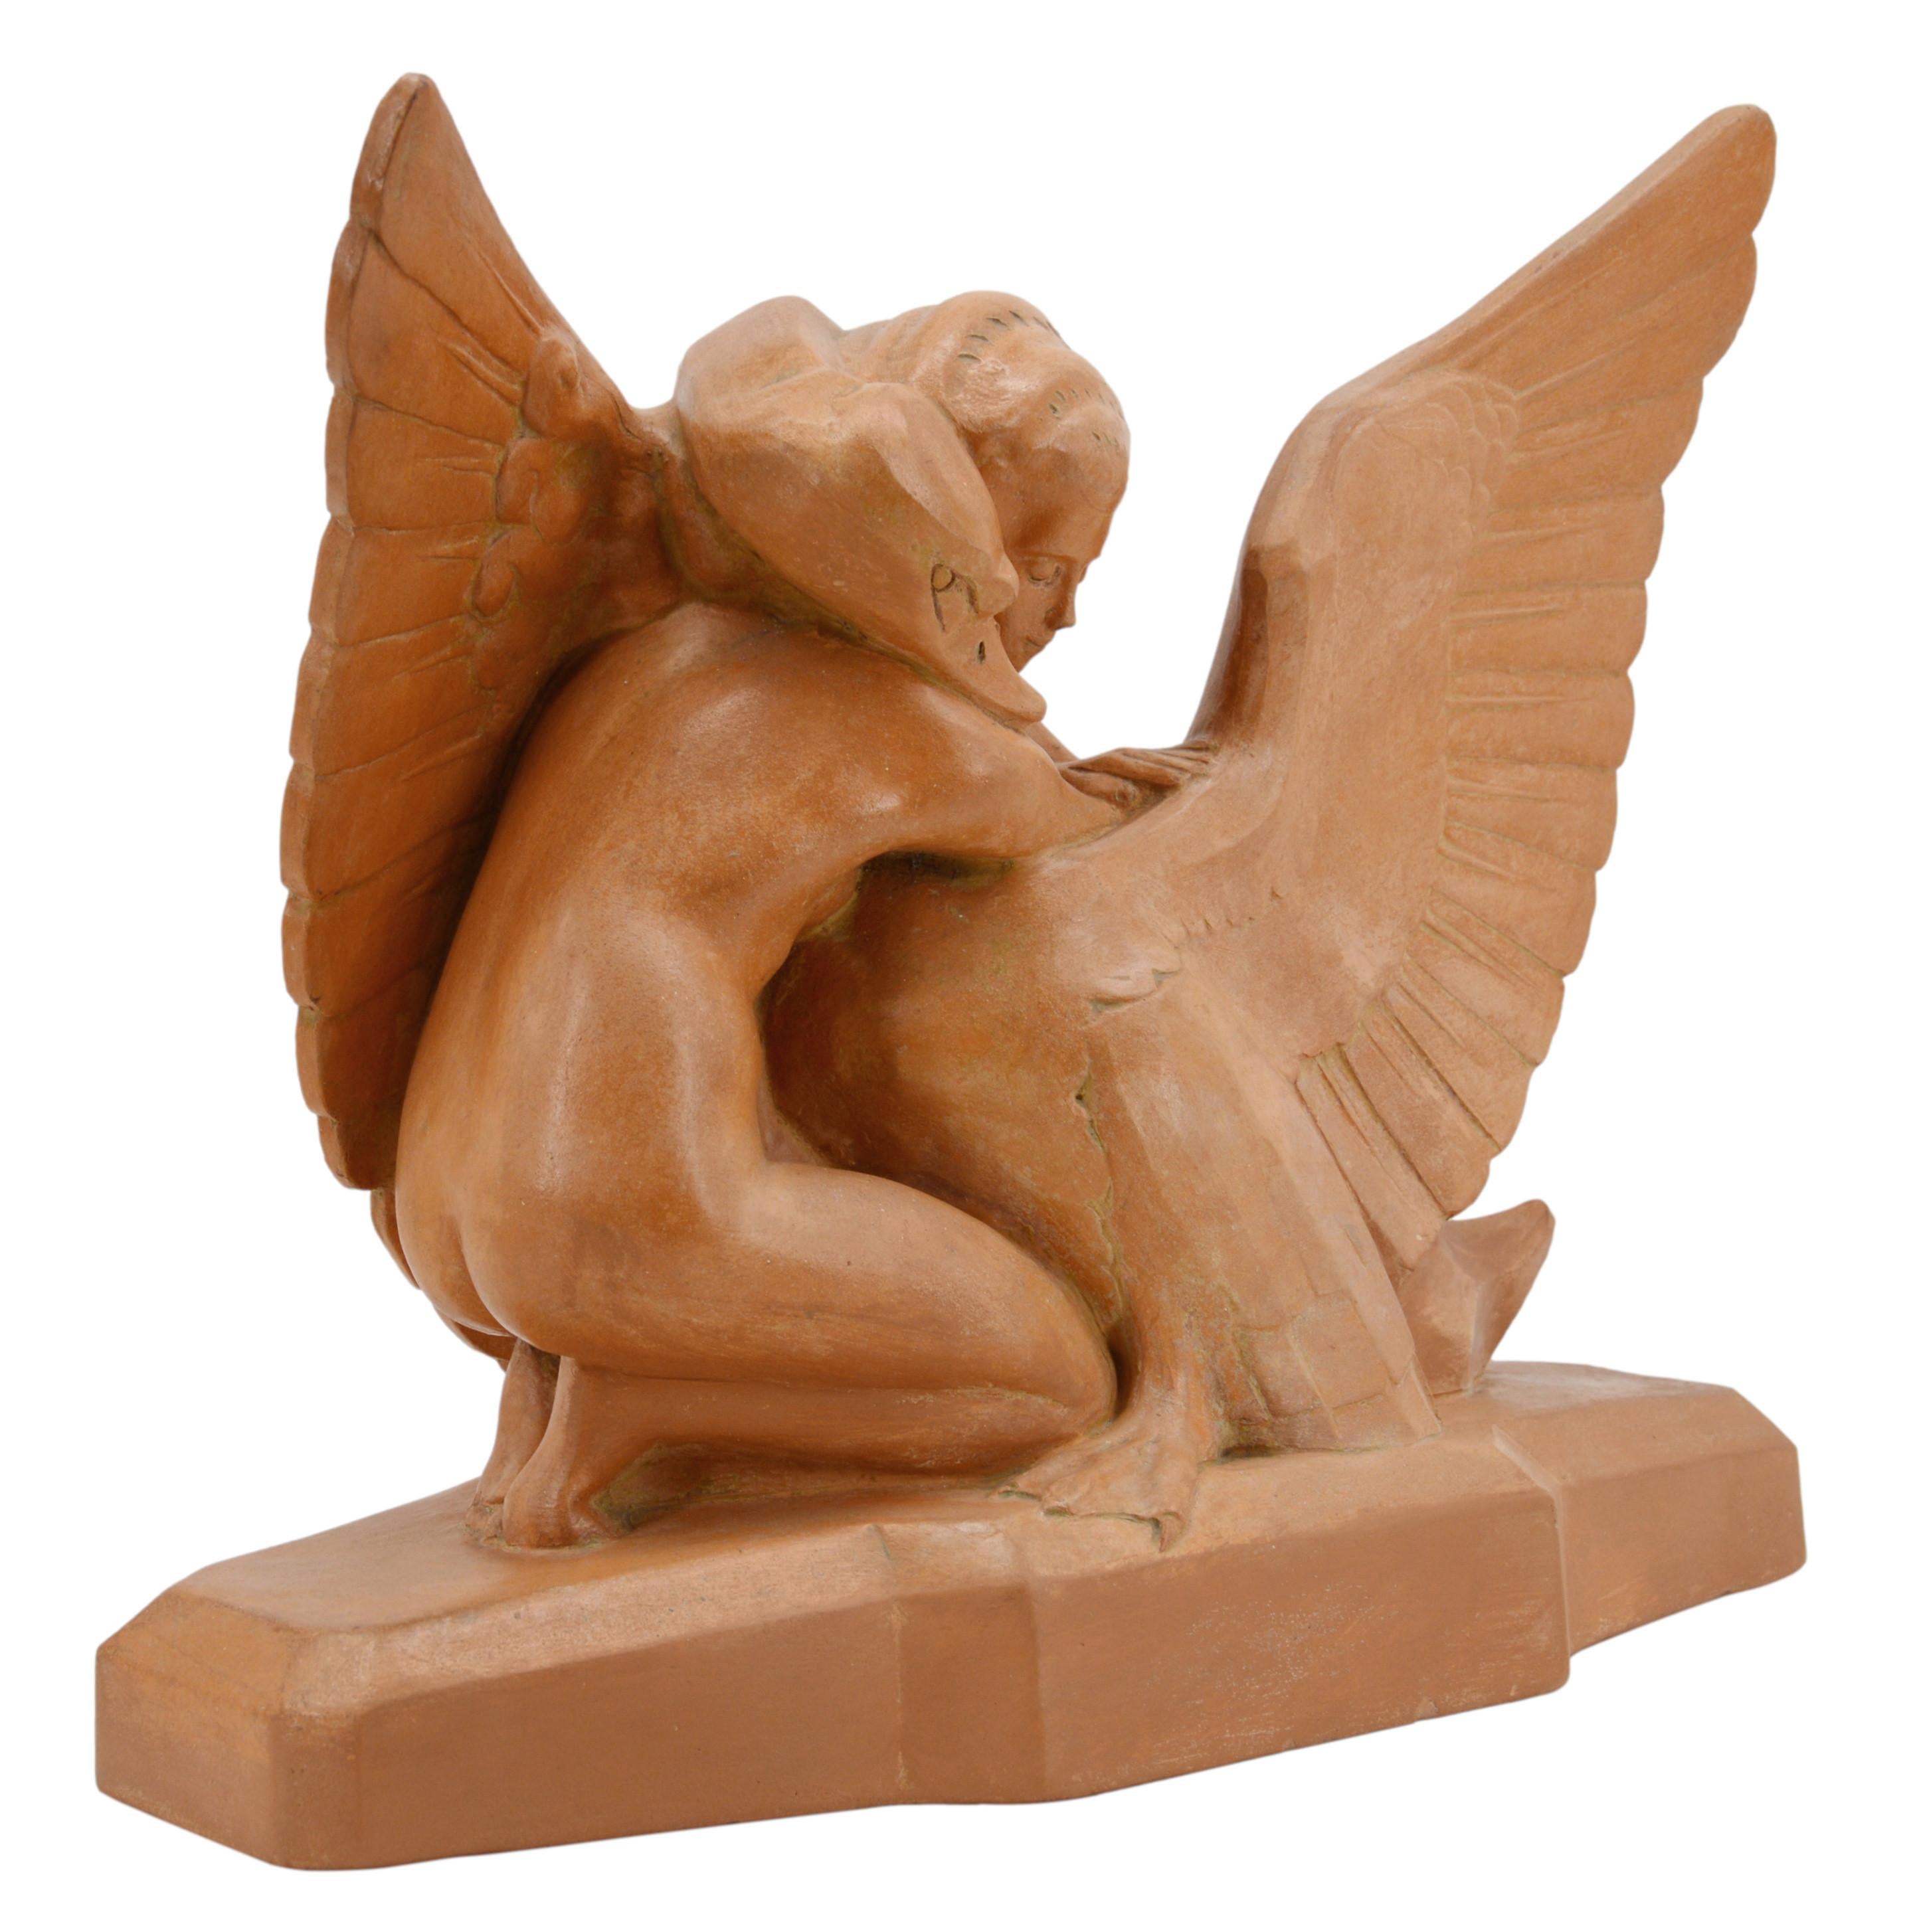 Leda and the swan sculpture by Gabriel Beauvais, France, 1930s. Terracotta. This sculpture was made in crackle glaze ceramic by Kaza Edition in Paris, that is illustrated in 